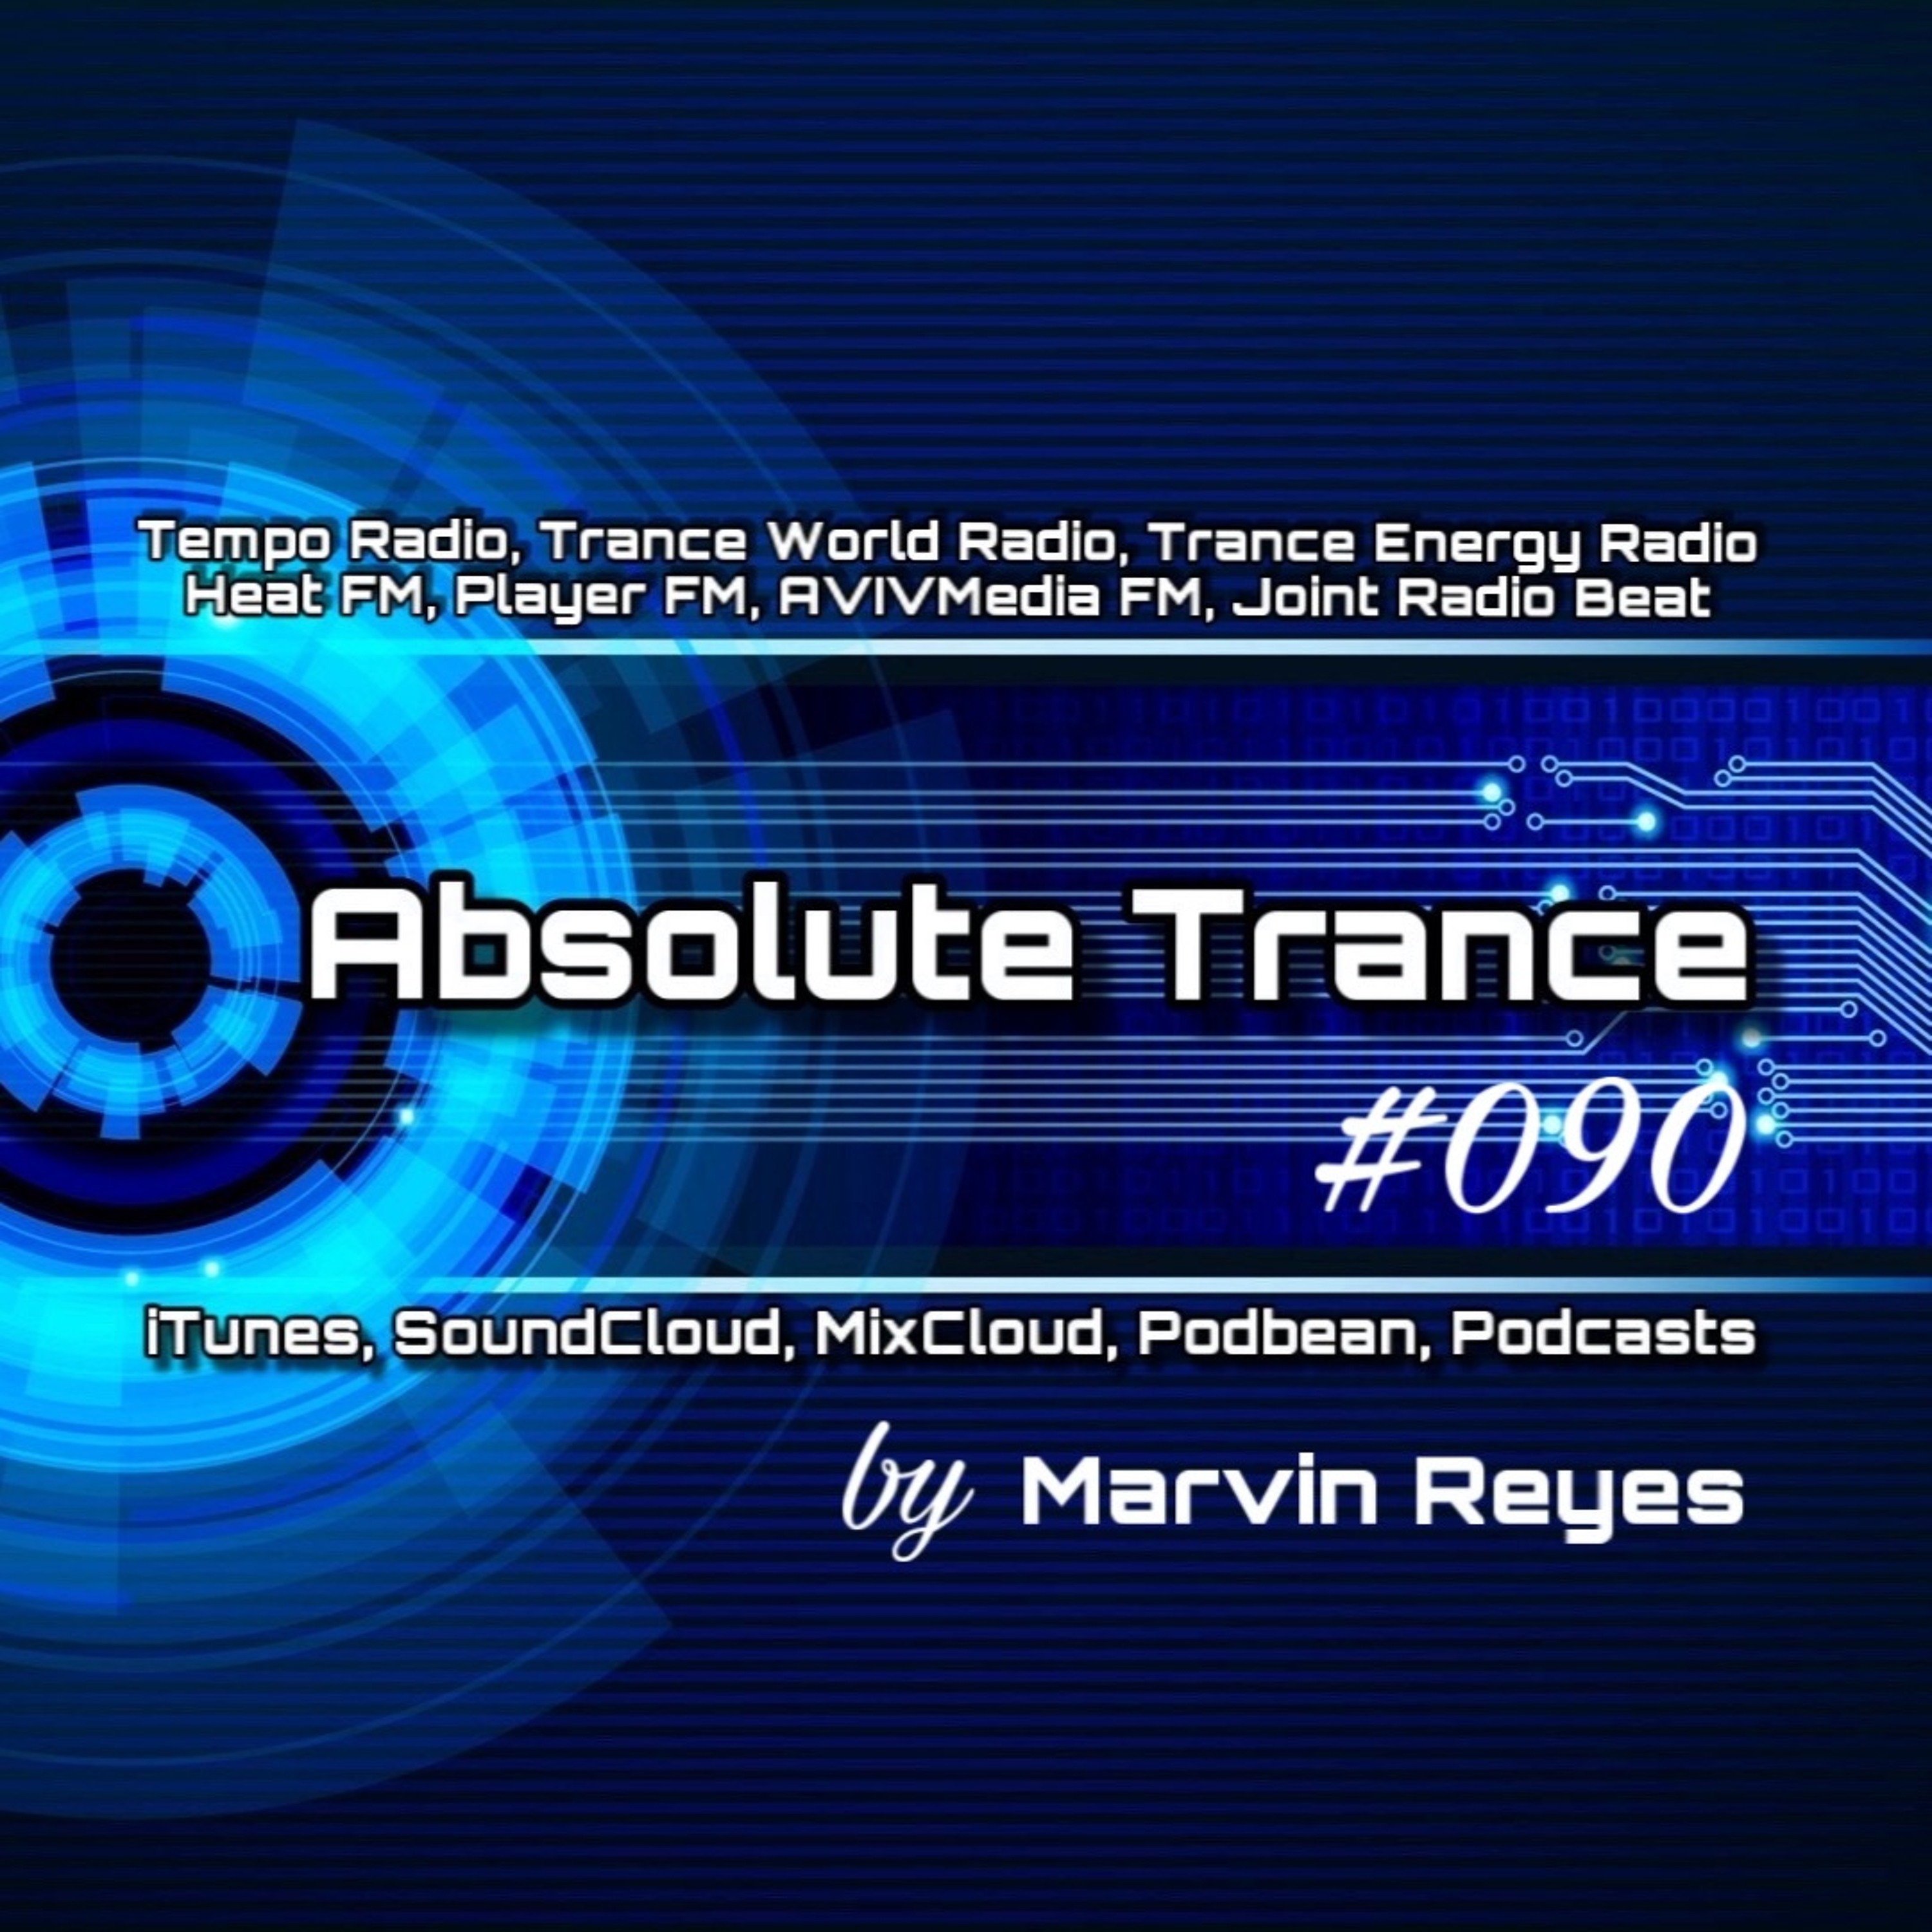 Absolute Trance #090